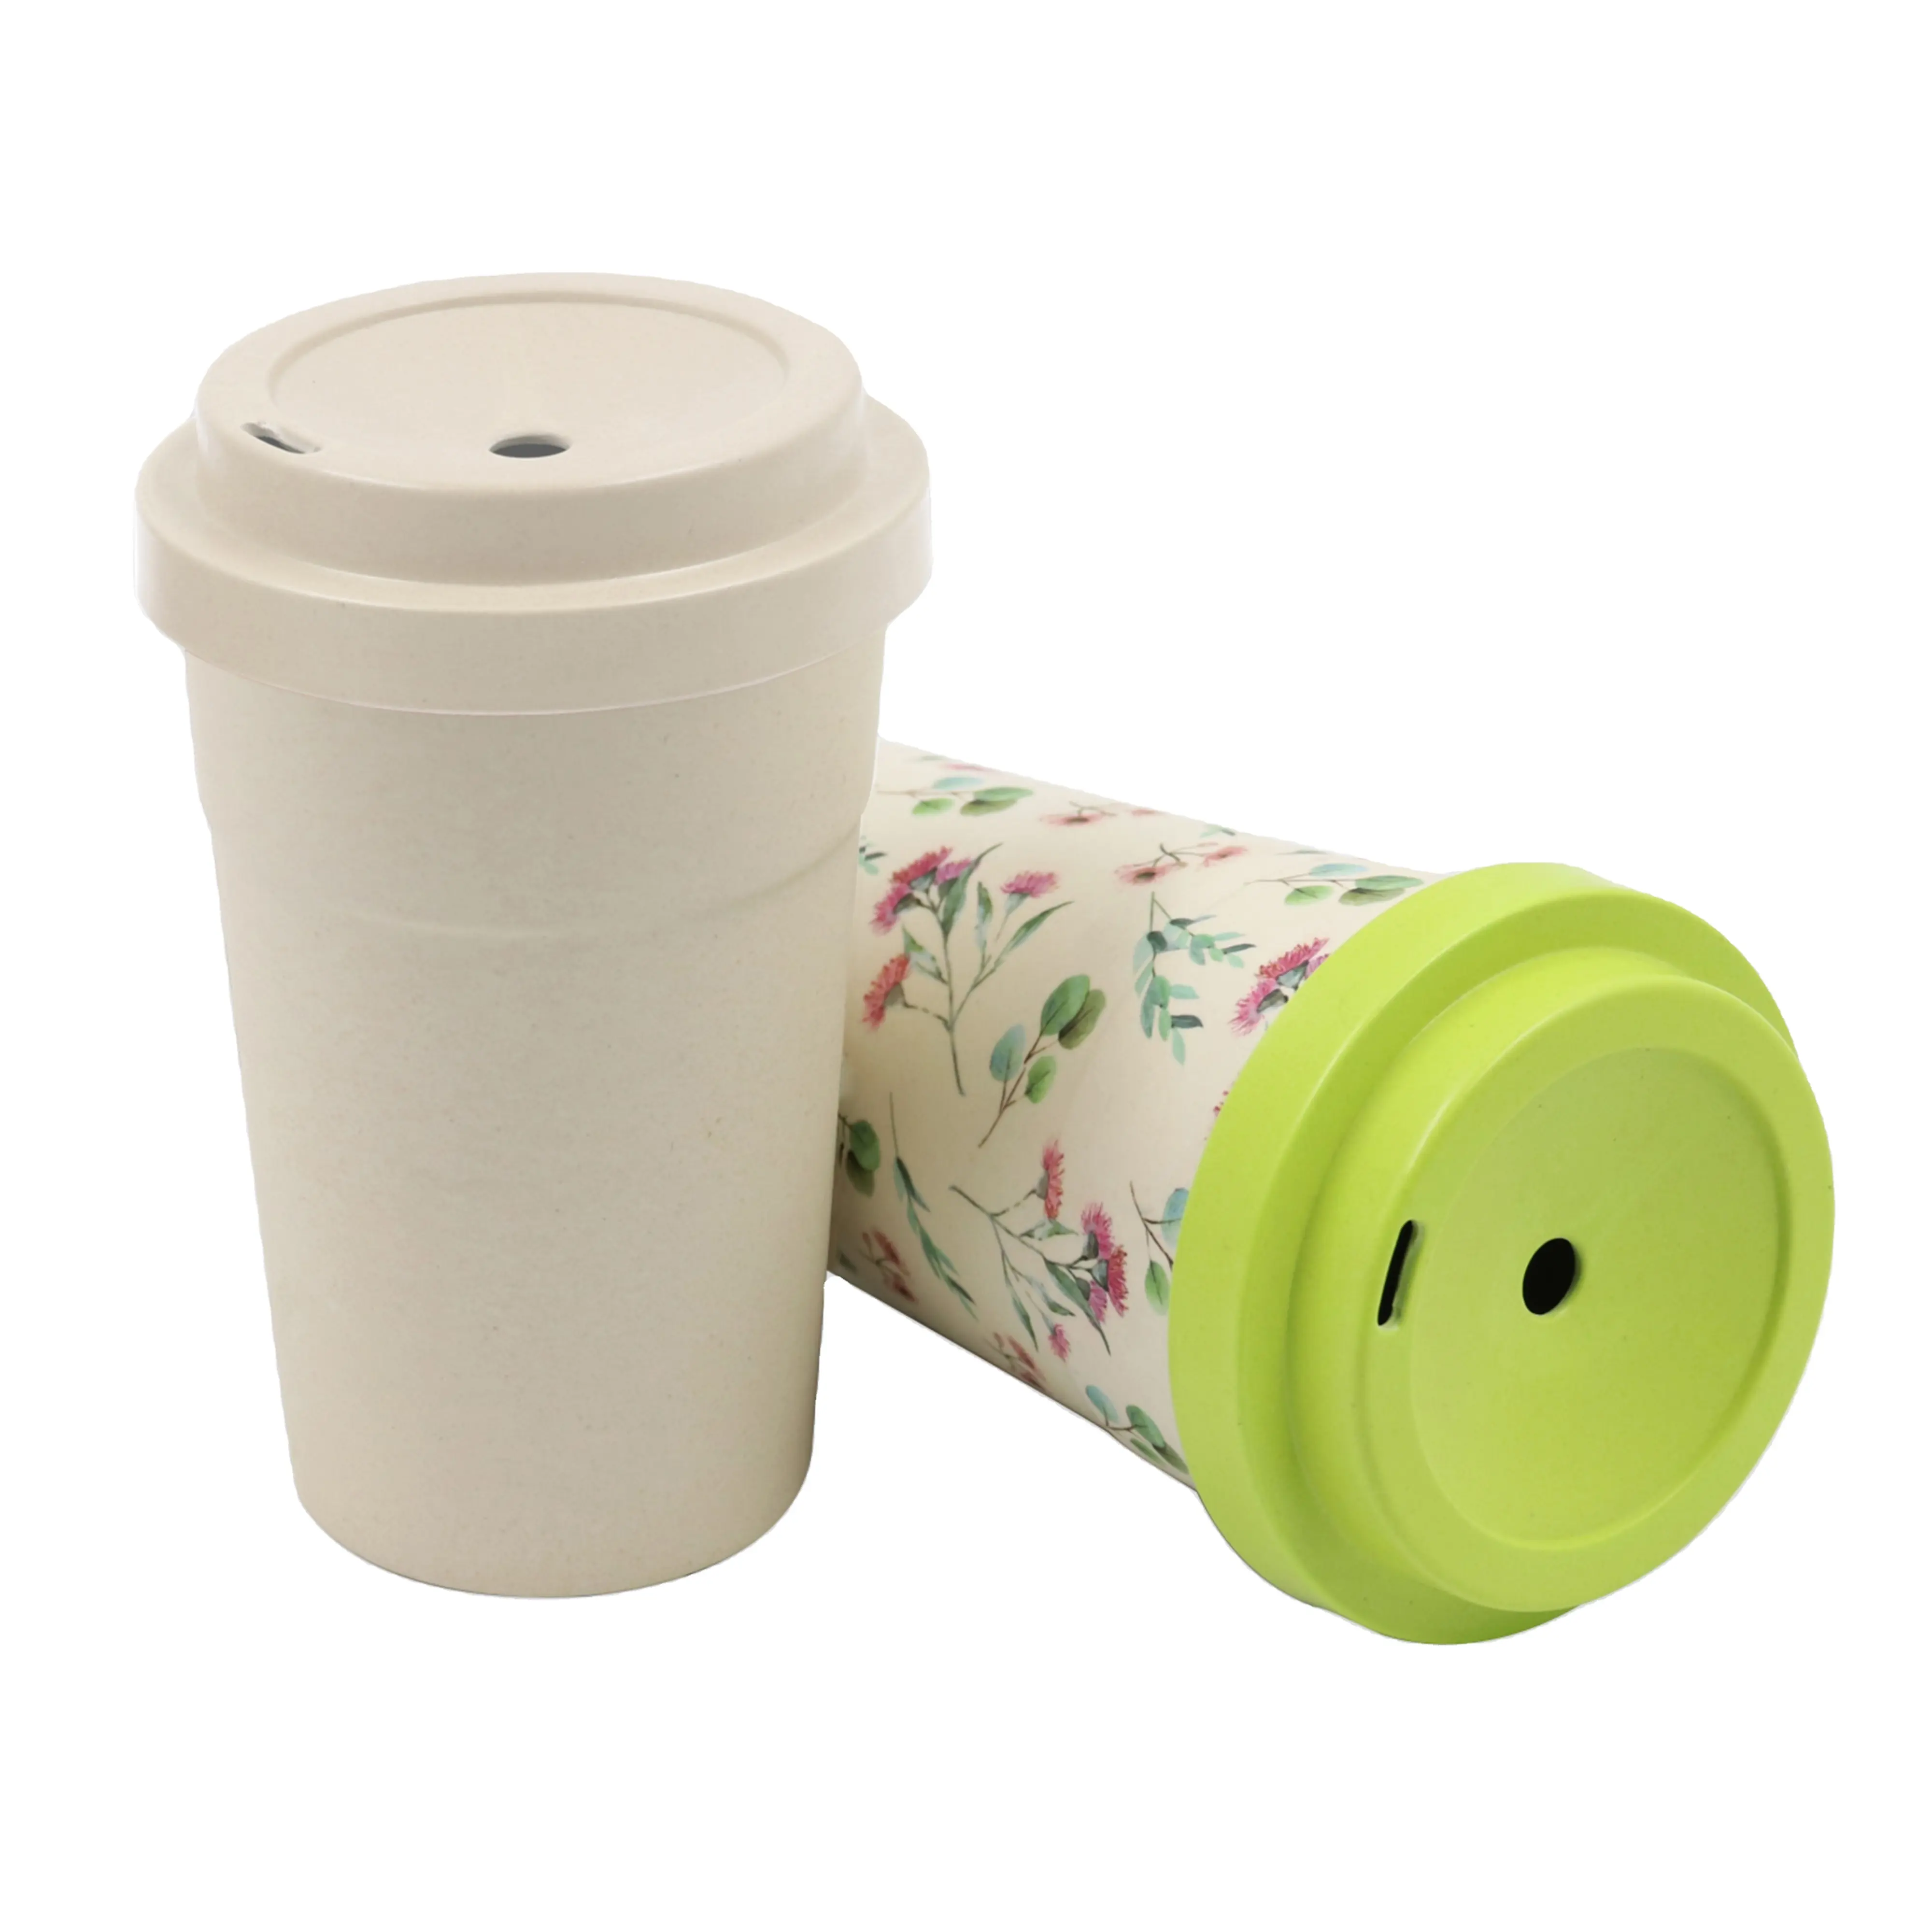 590ml Bamboo Fiber Threaded mug reusable water coffee cup for cold hot drinks